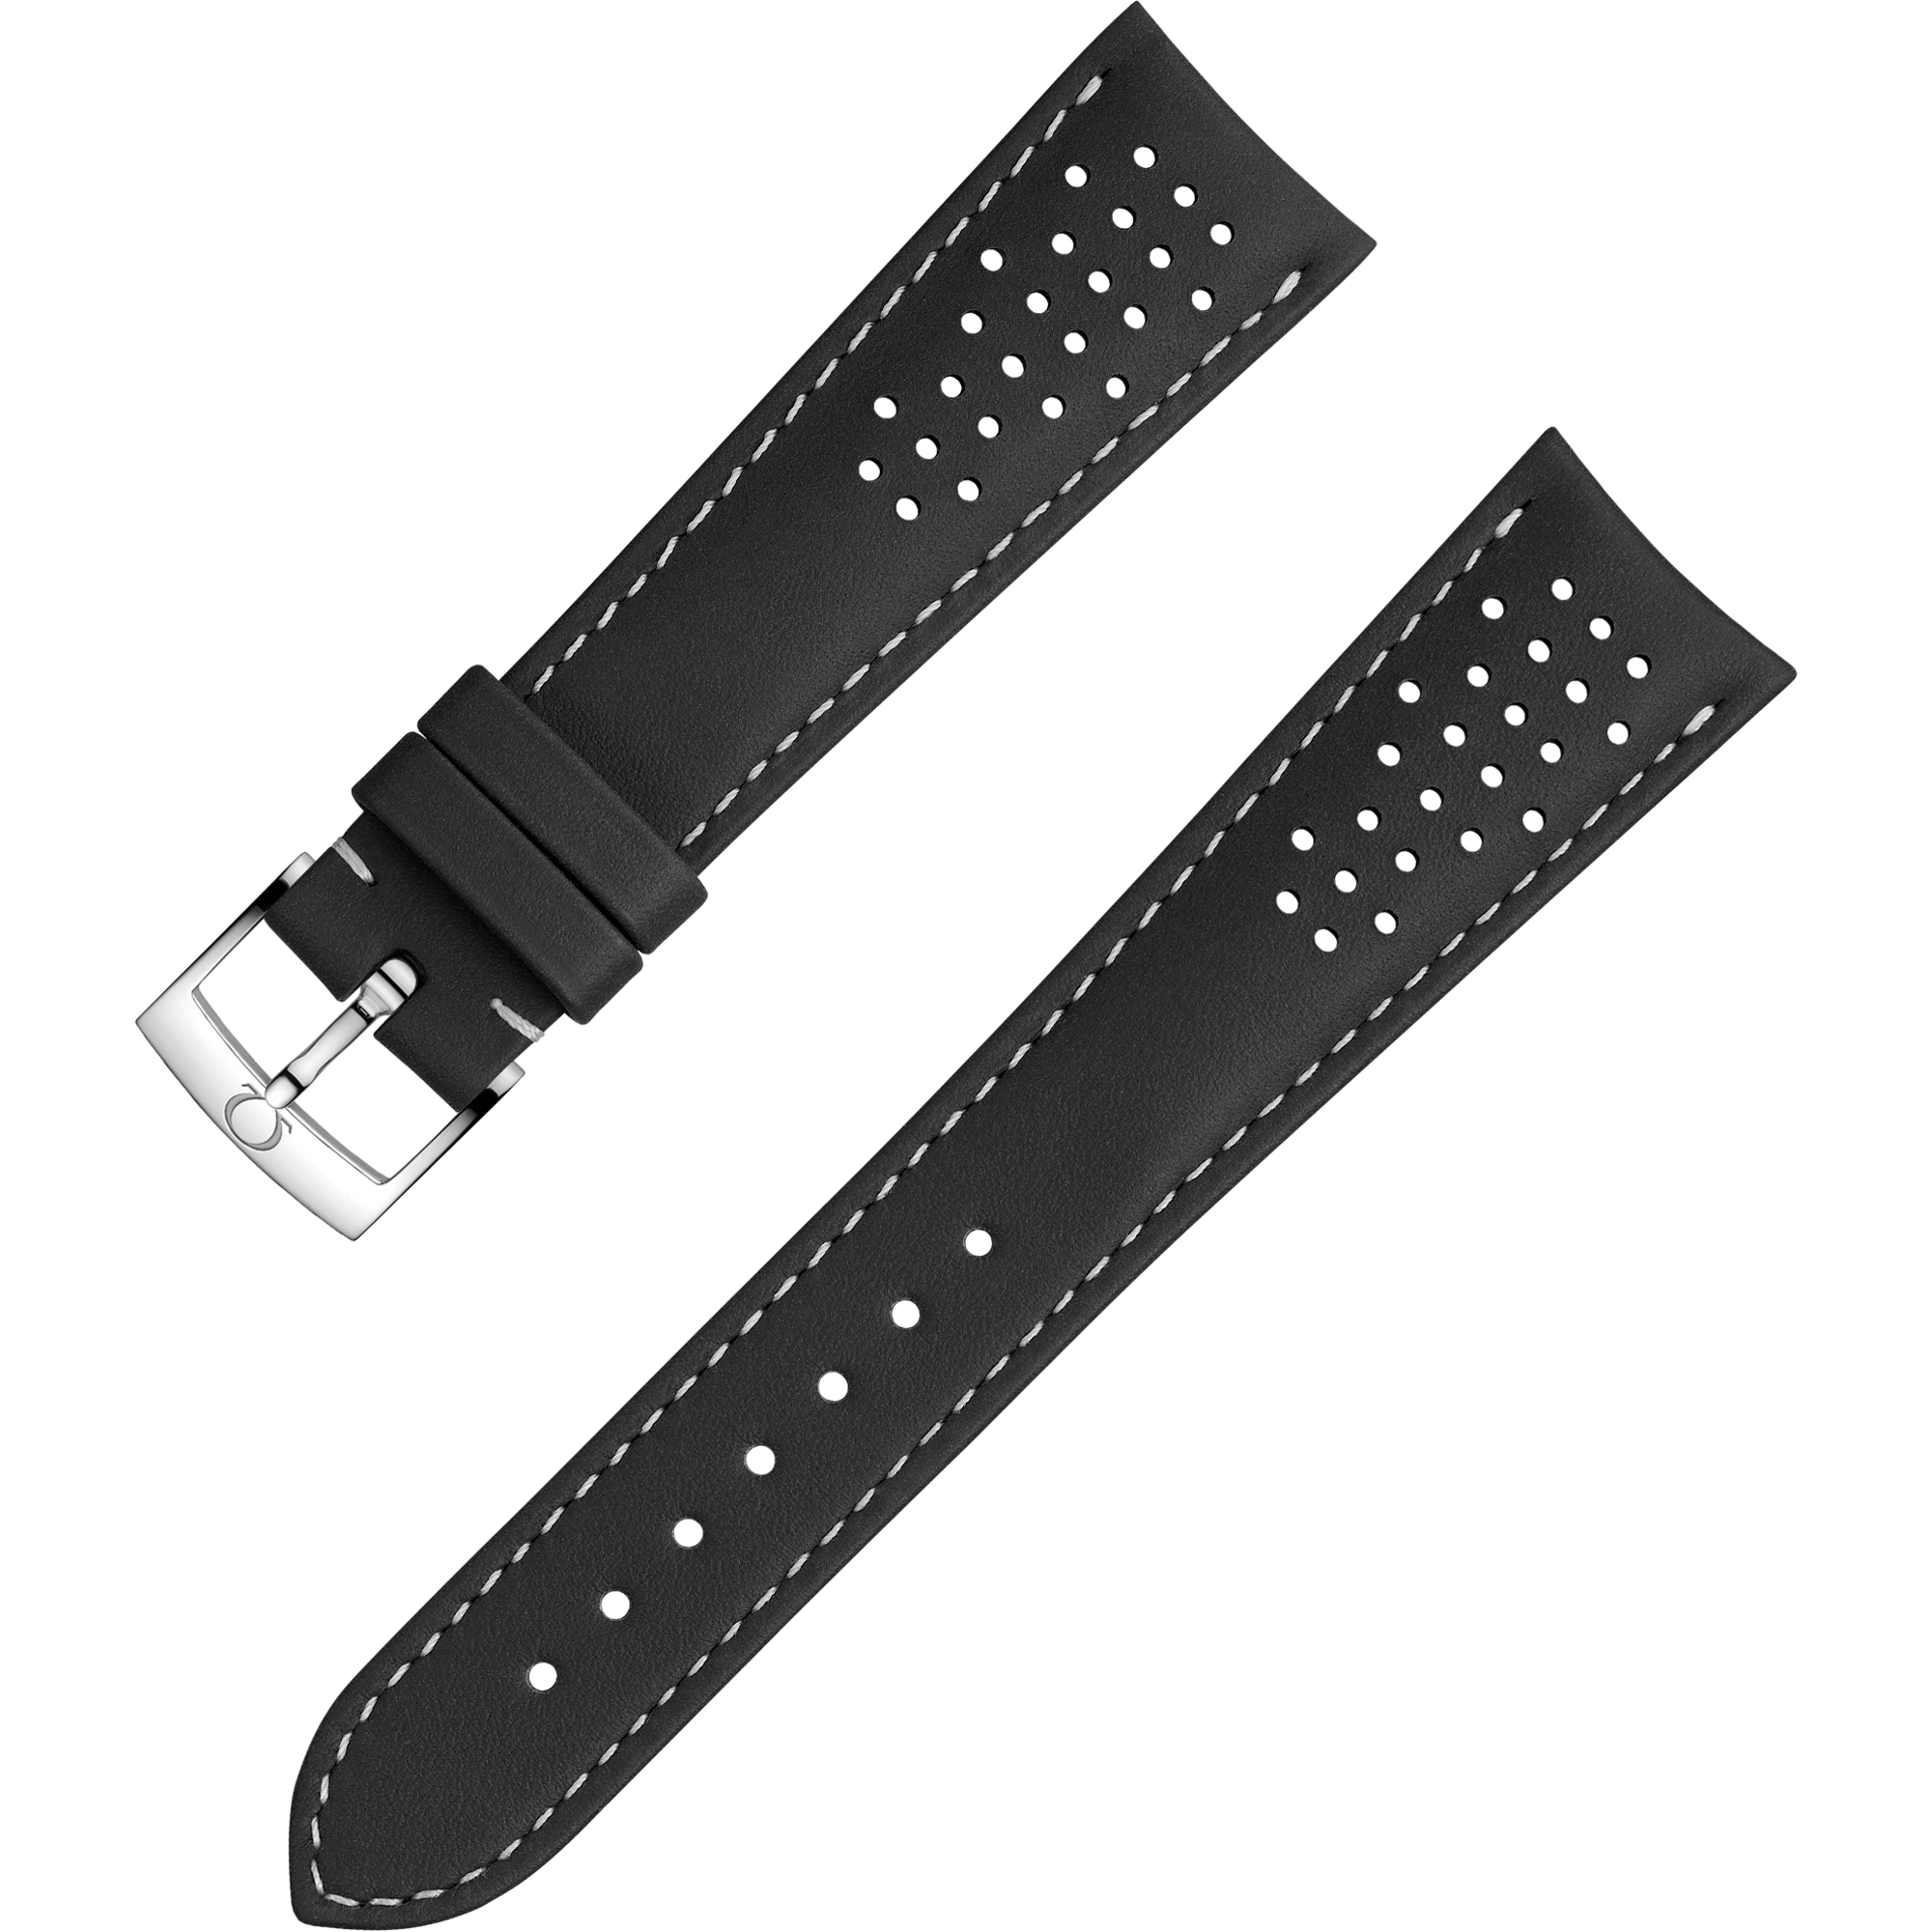 Two-piece strap - Black leather strap with pin buckle - 032CUZ010017